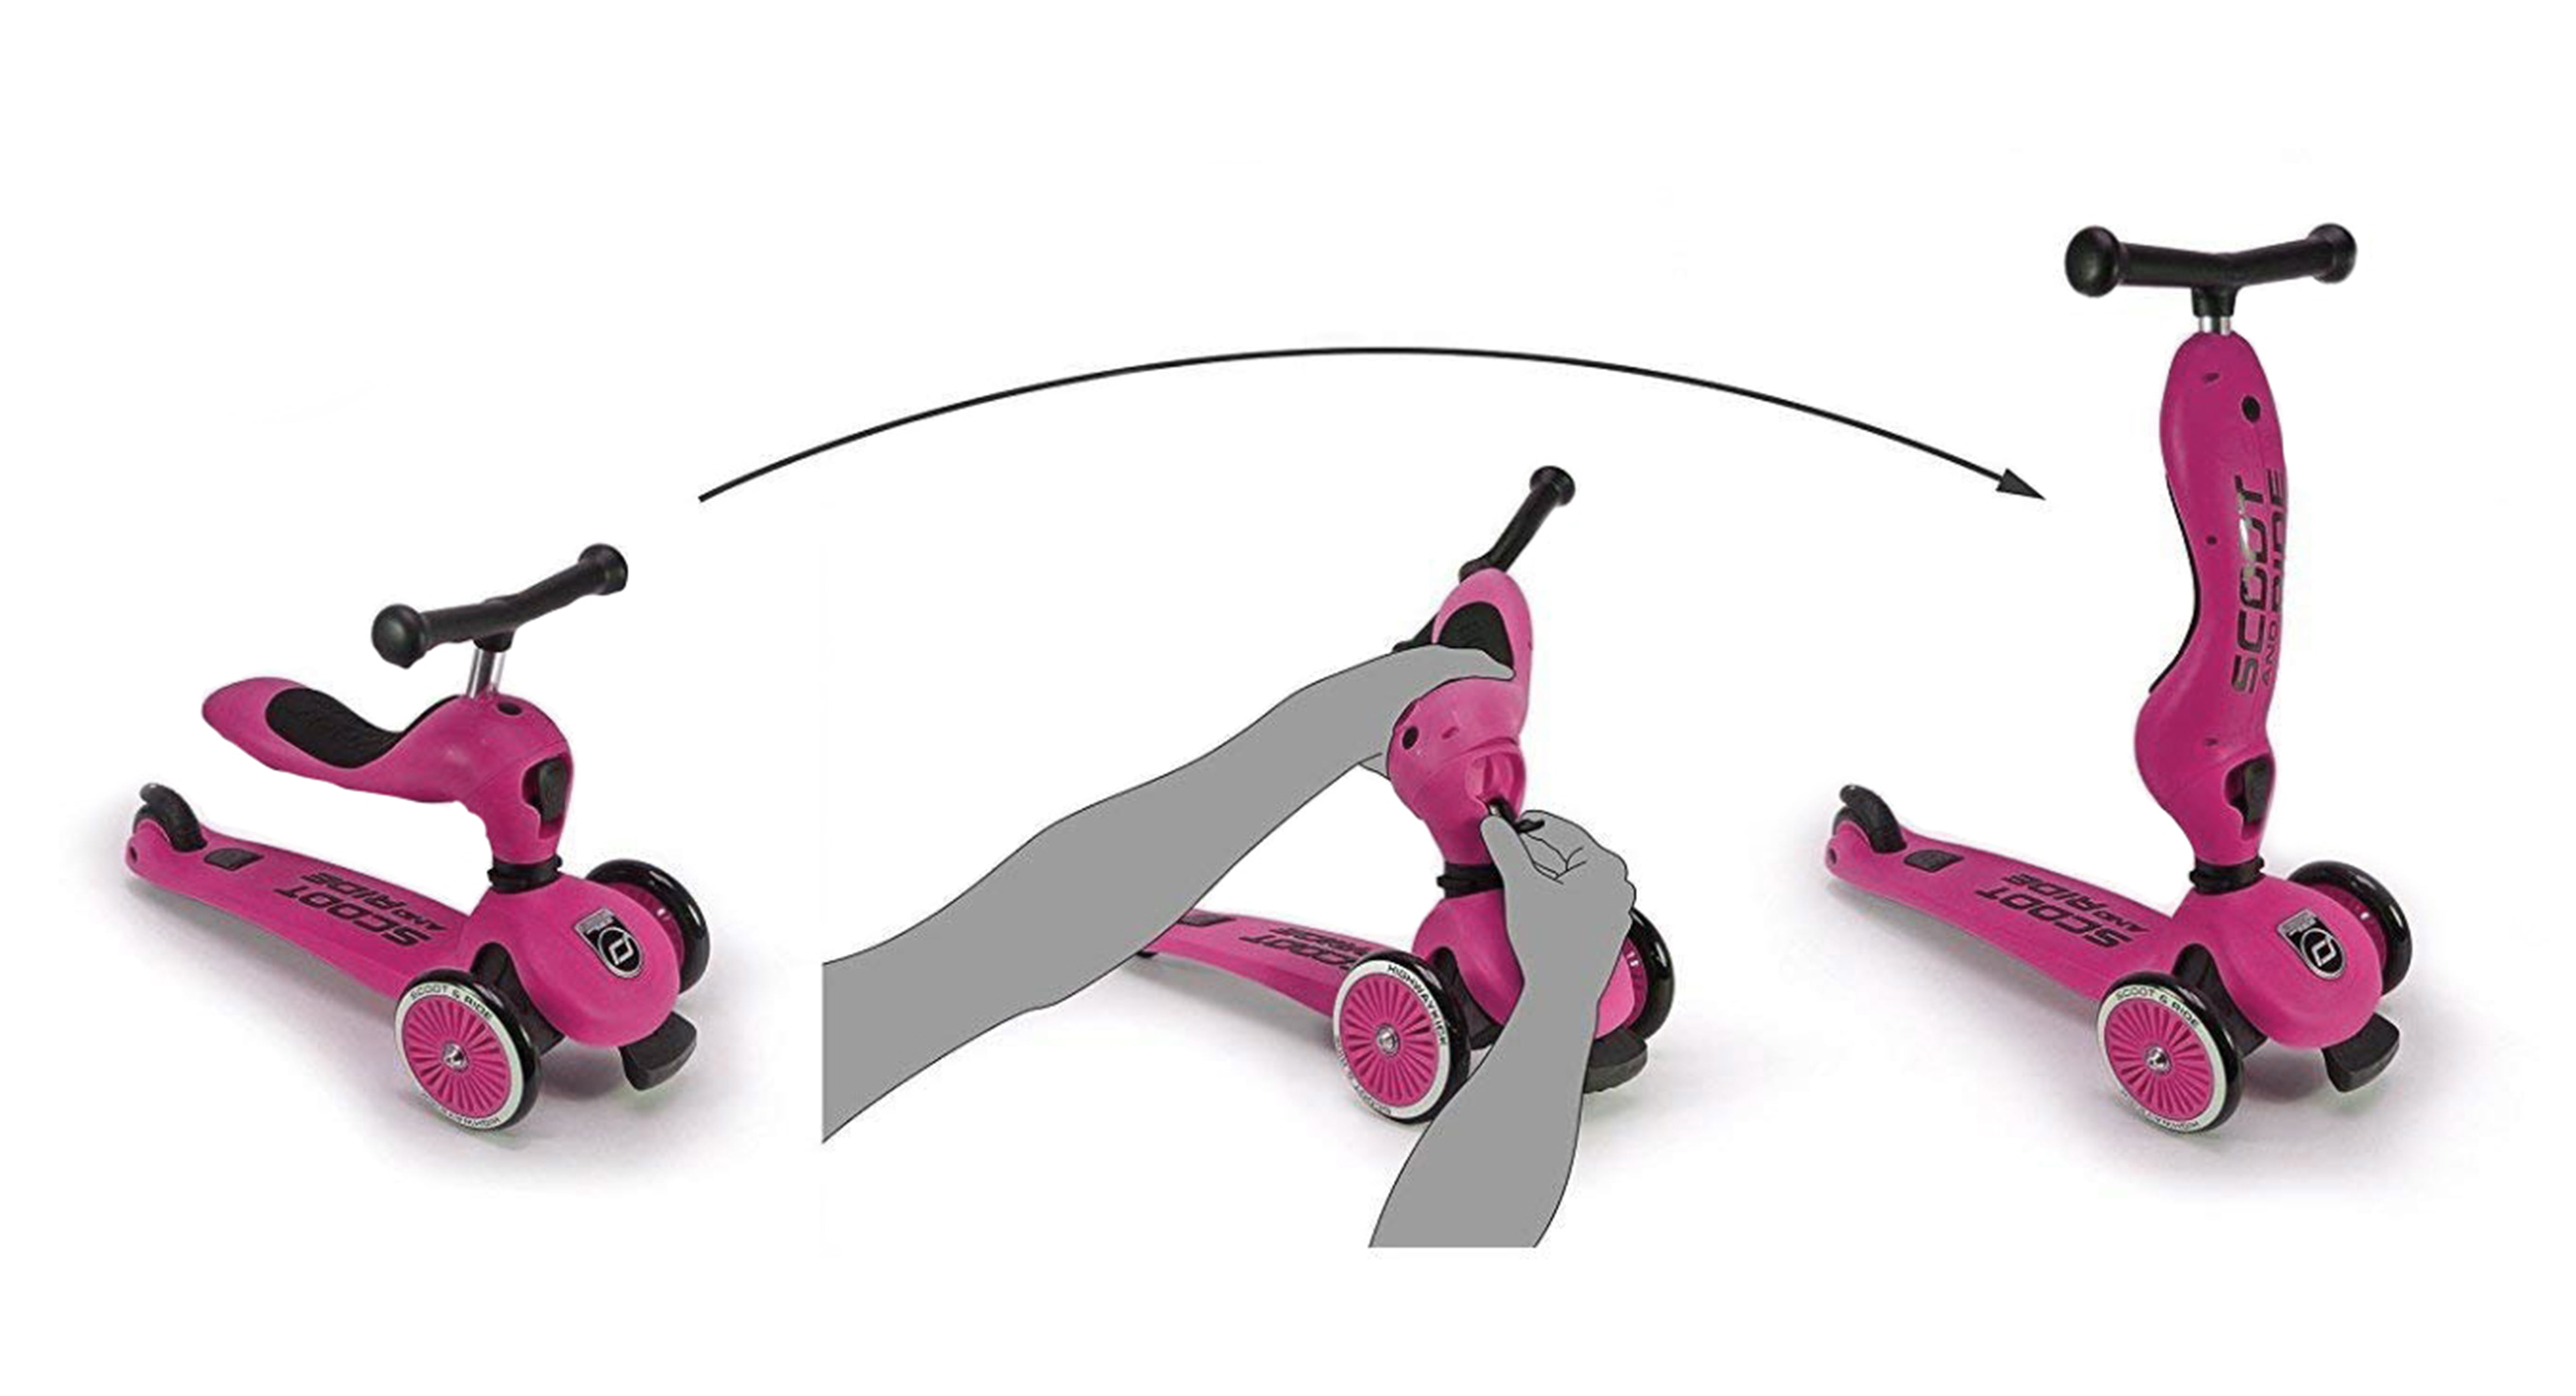 Scoot & Ride 2-in-1 Bike & Kick Scooter for Children Ages 1-5 (Pink) 